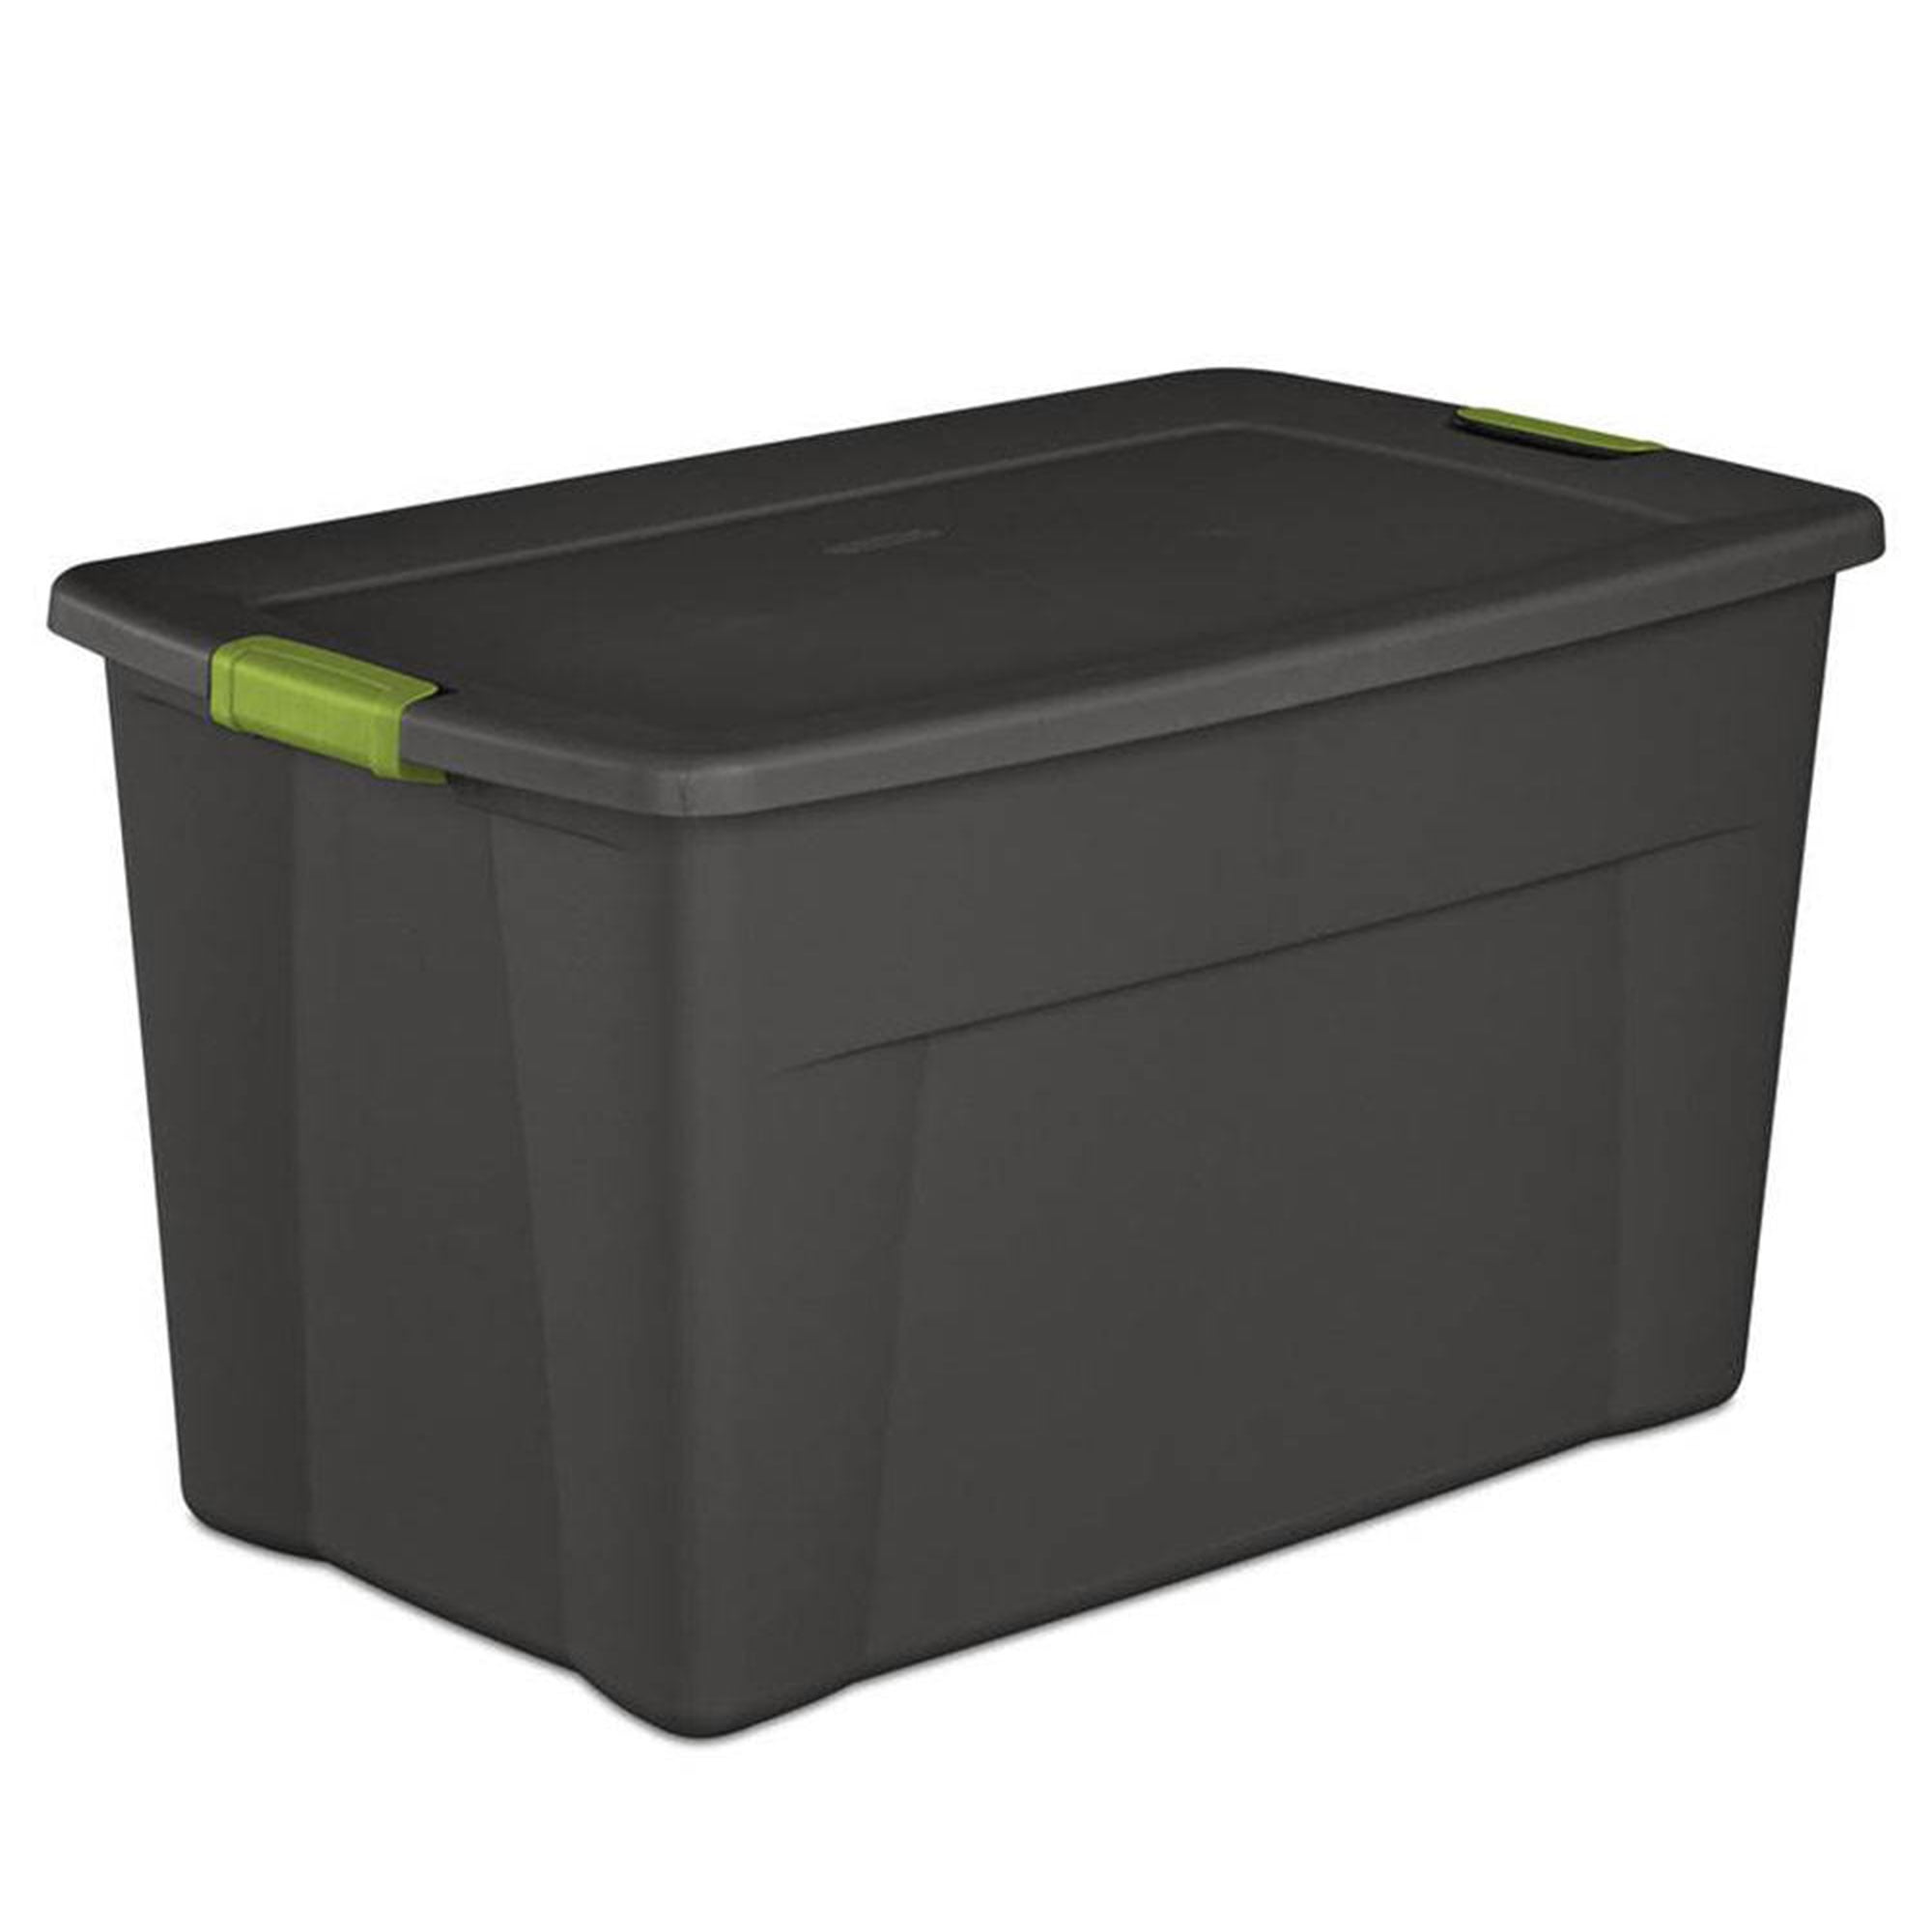 Sterilite 35 Gallon Storage Tote Box with Latching Container Lid, (16 Pack) 